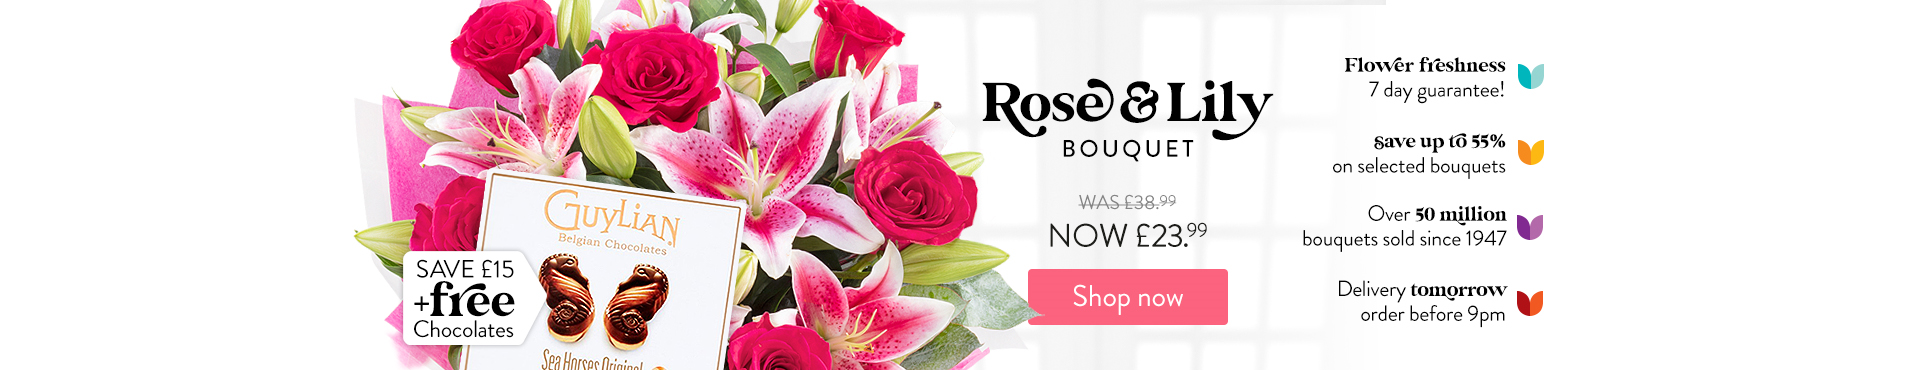 Rose & Lily bouquet Save £15 and free chocolates